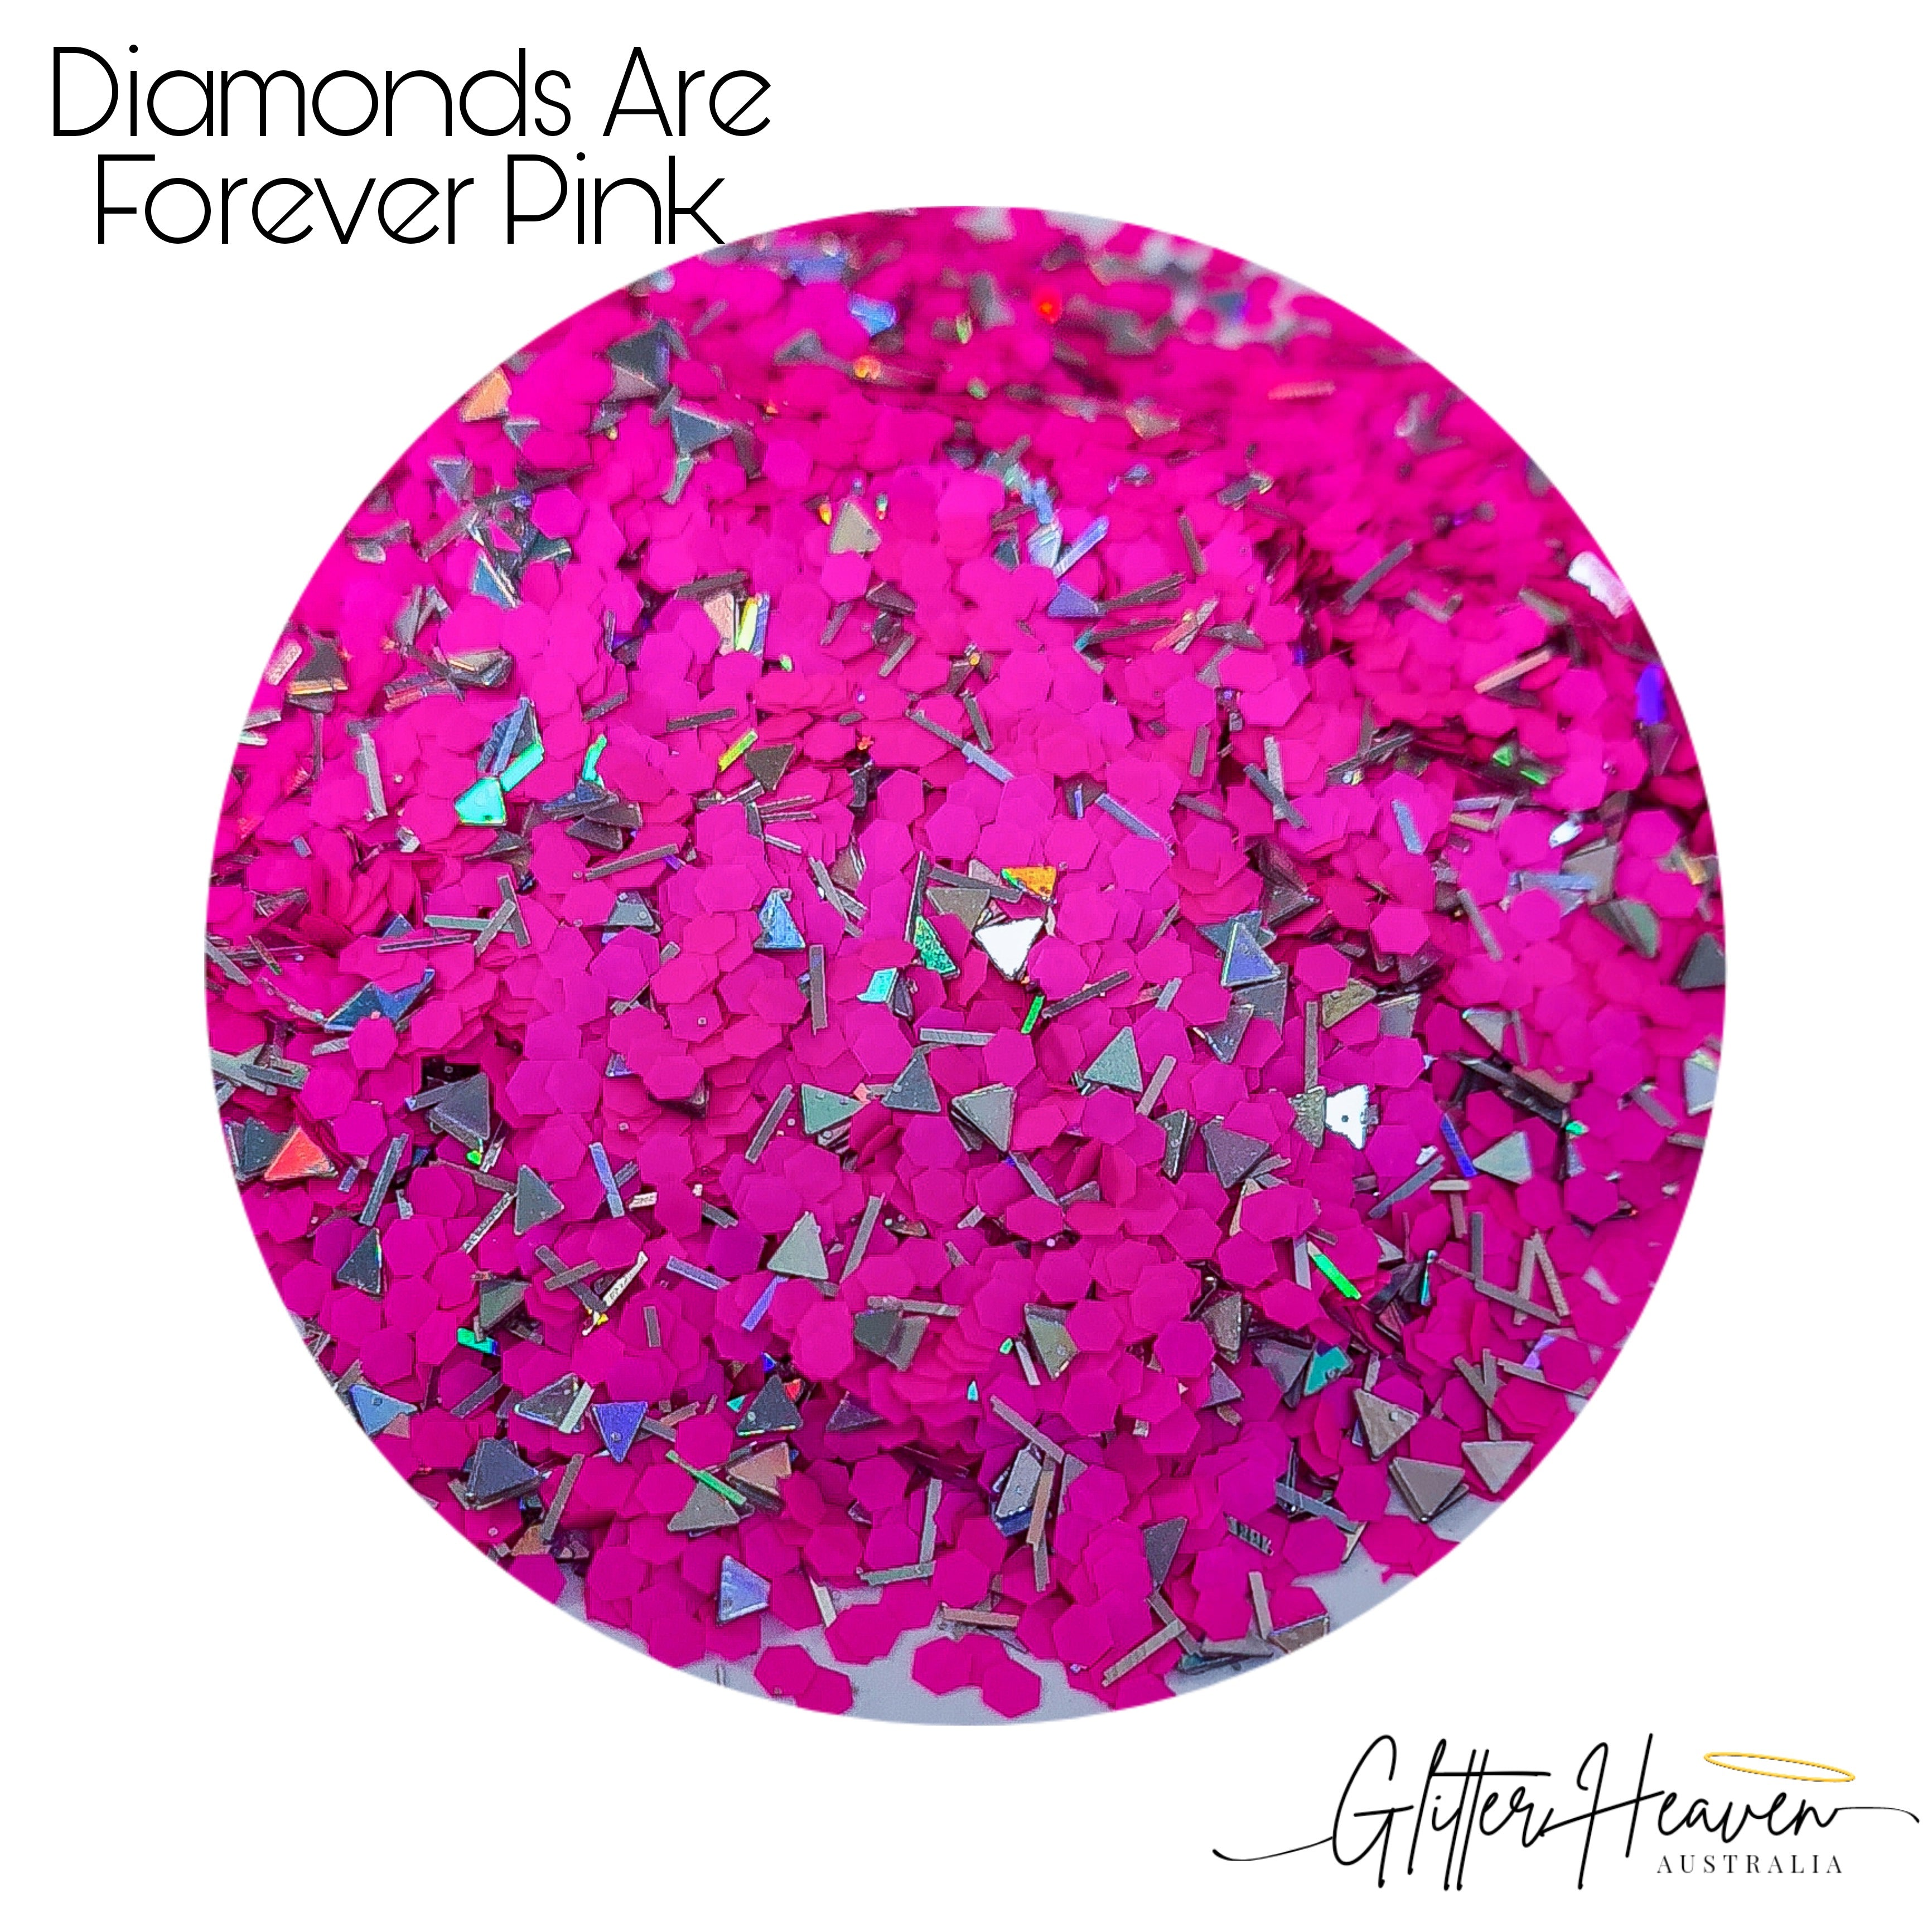 Diamonds Are Forever Pink